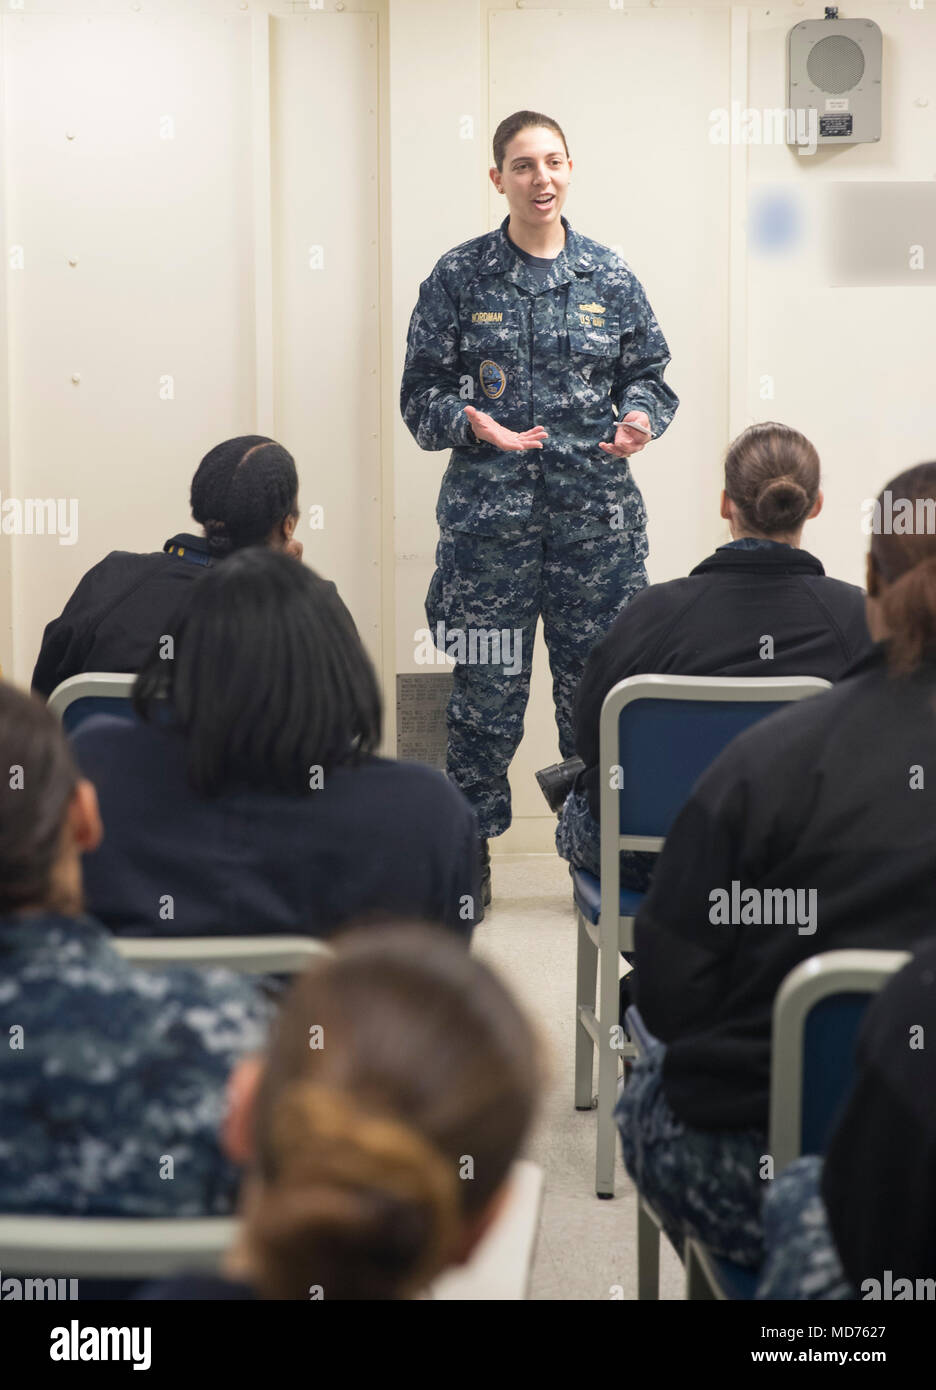 NORFOLK, Va. (Mar. 28, 2018) -- Lt. j.g. Carol Nordman, assigned to USS Gerald R. Ford's (CVN 78) combat systems department, speaks to Sailors during a women's symposium organized by Ford's Multicultural Heritage Committee. The 2018 Women's History Month theme is ' Nevertheless, She Persisted: Honoring Women Who Fight All Forms of Discrimination Against Women.' (U.S. Navy photo by Mass Communication Specialist 3rd Class Sean Elliott) Stock Photo